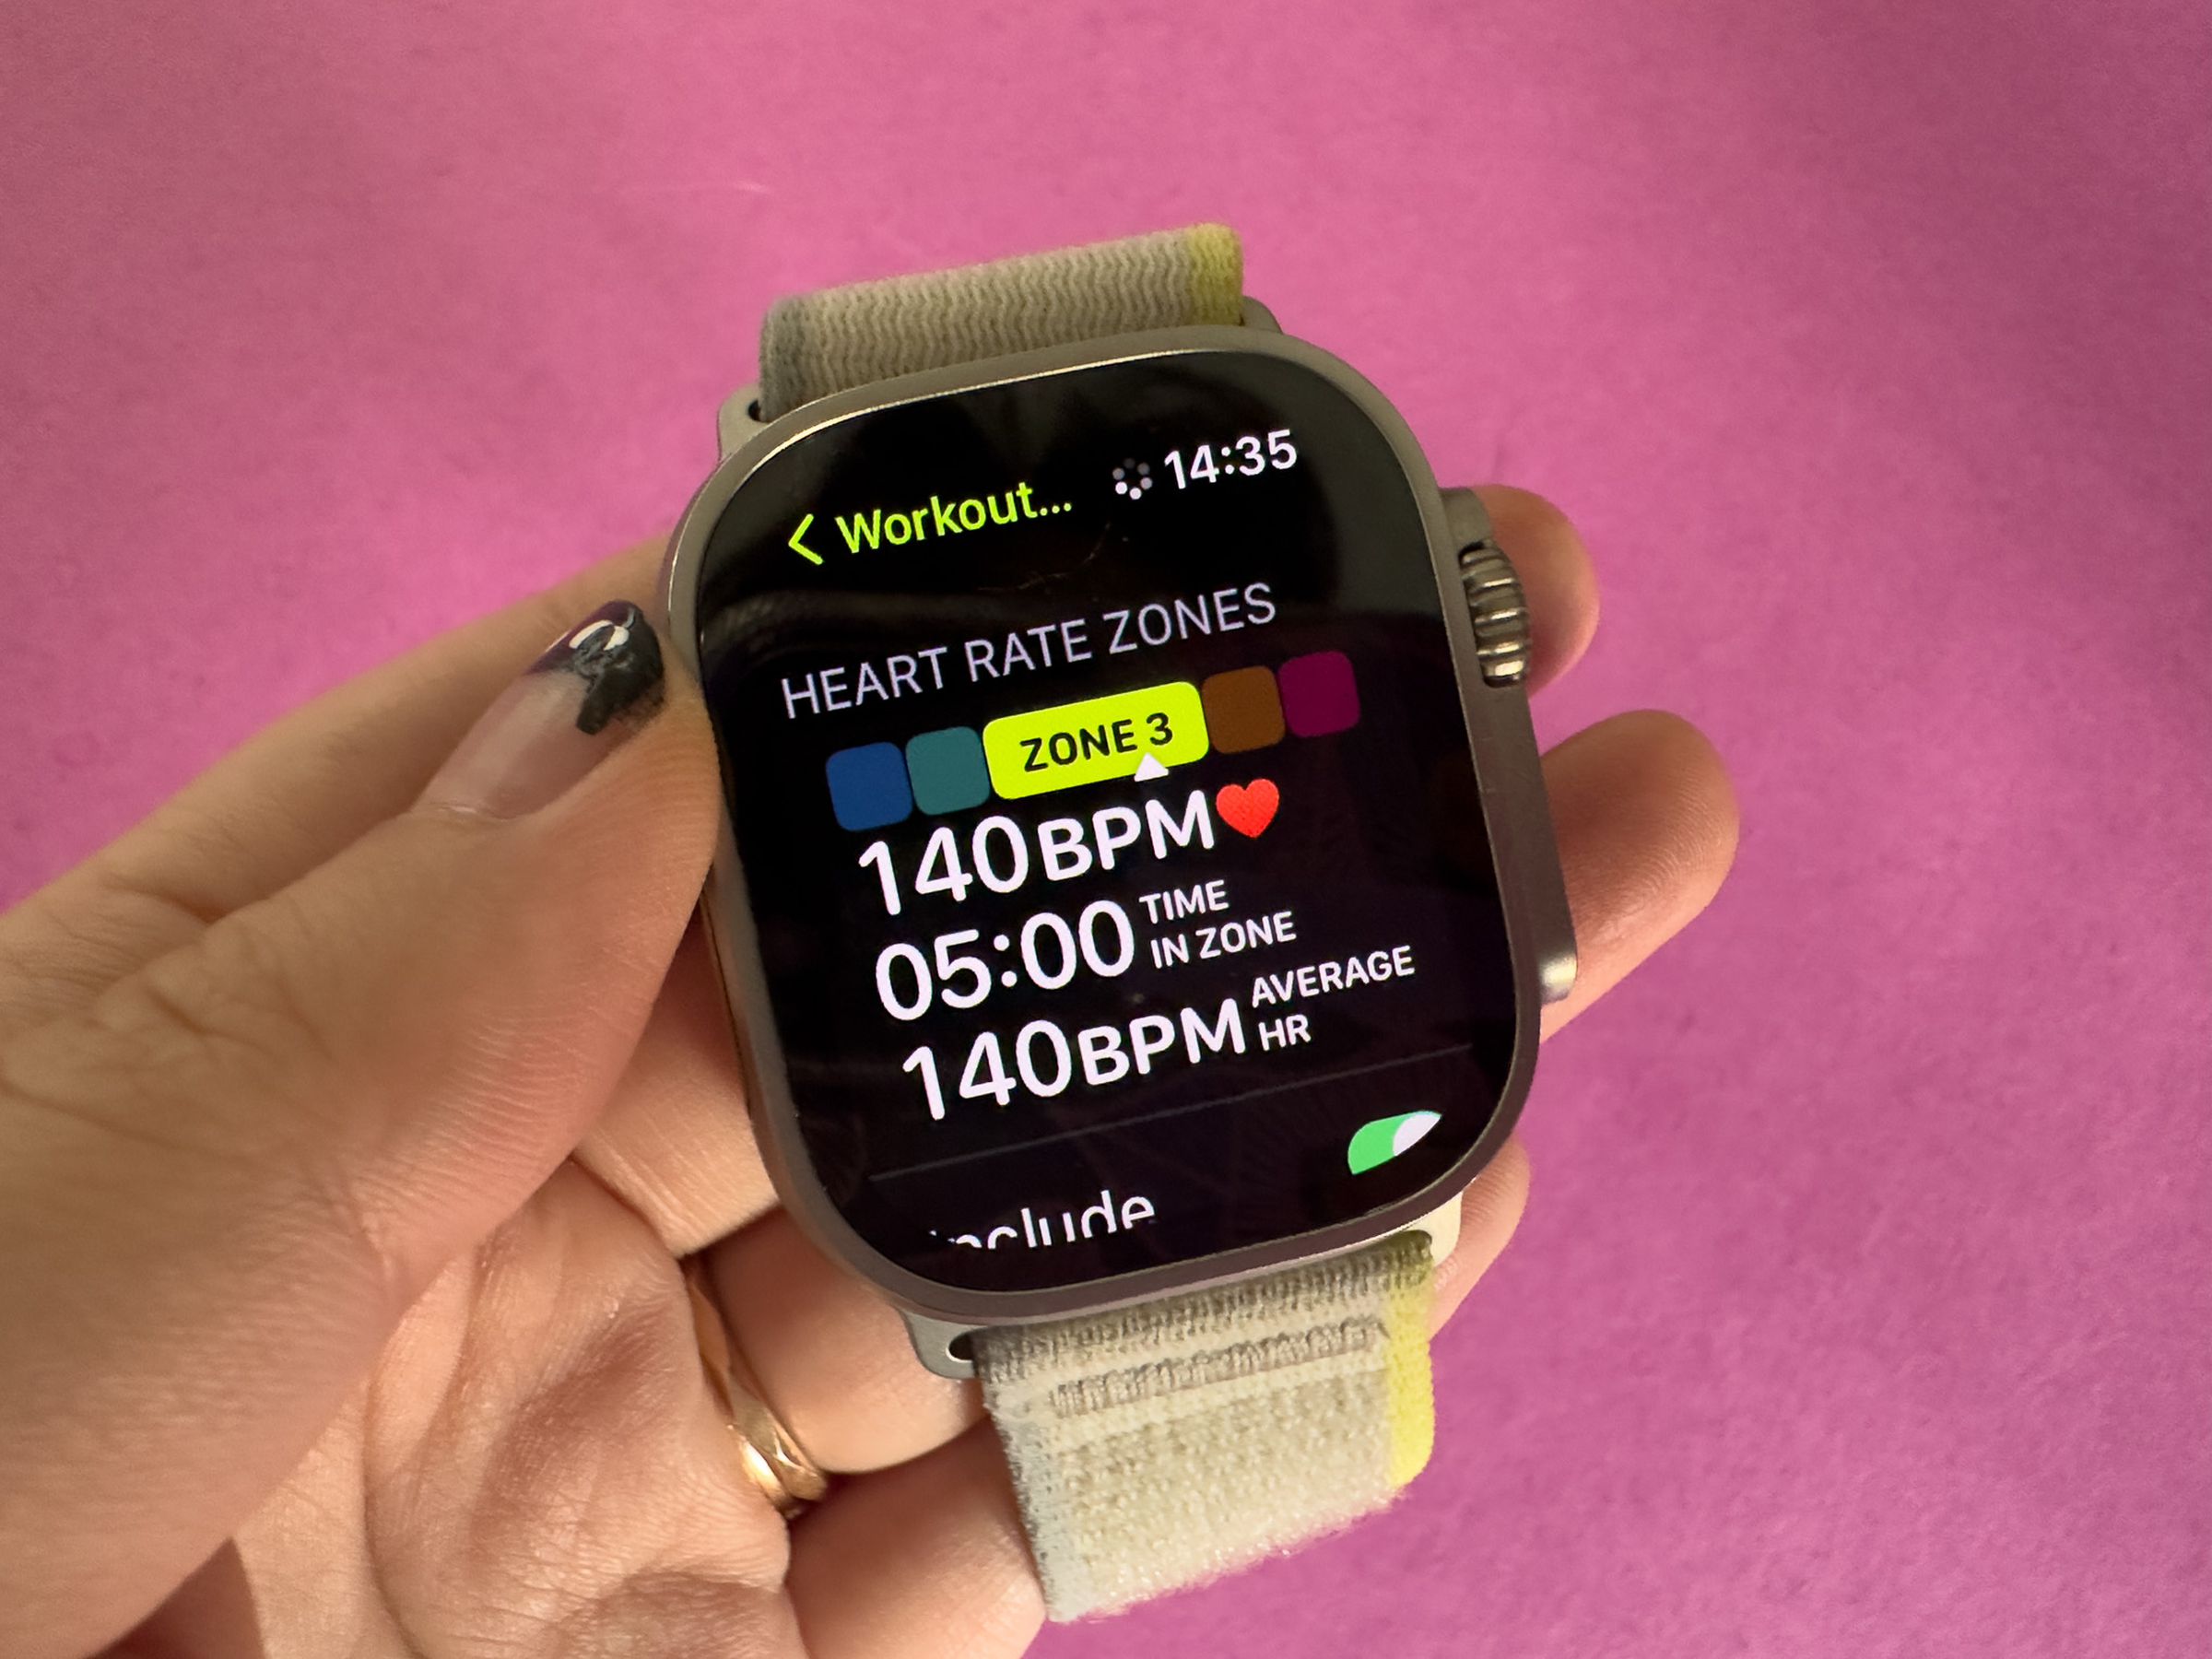 The Heart Rate Zones workout view on an Apple Watch Ultra